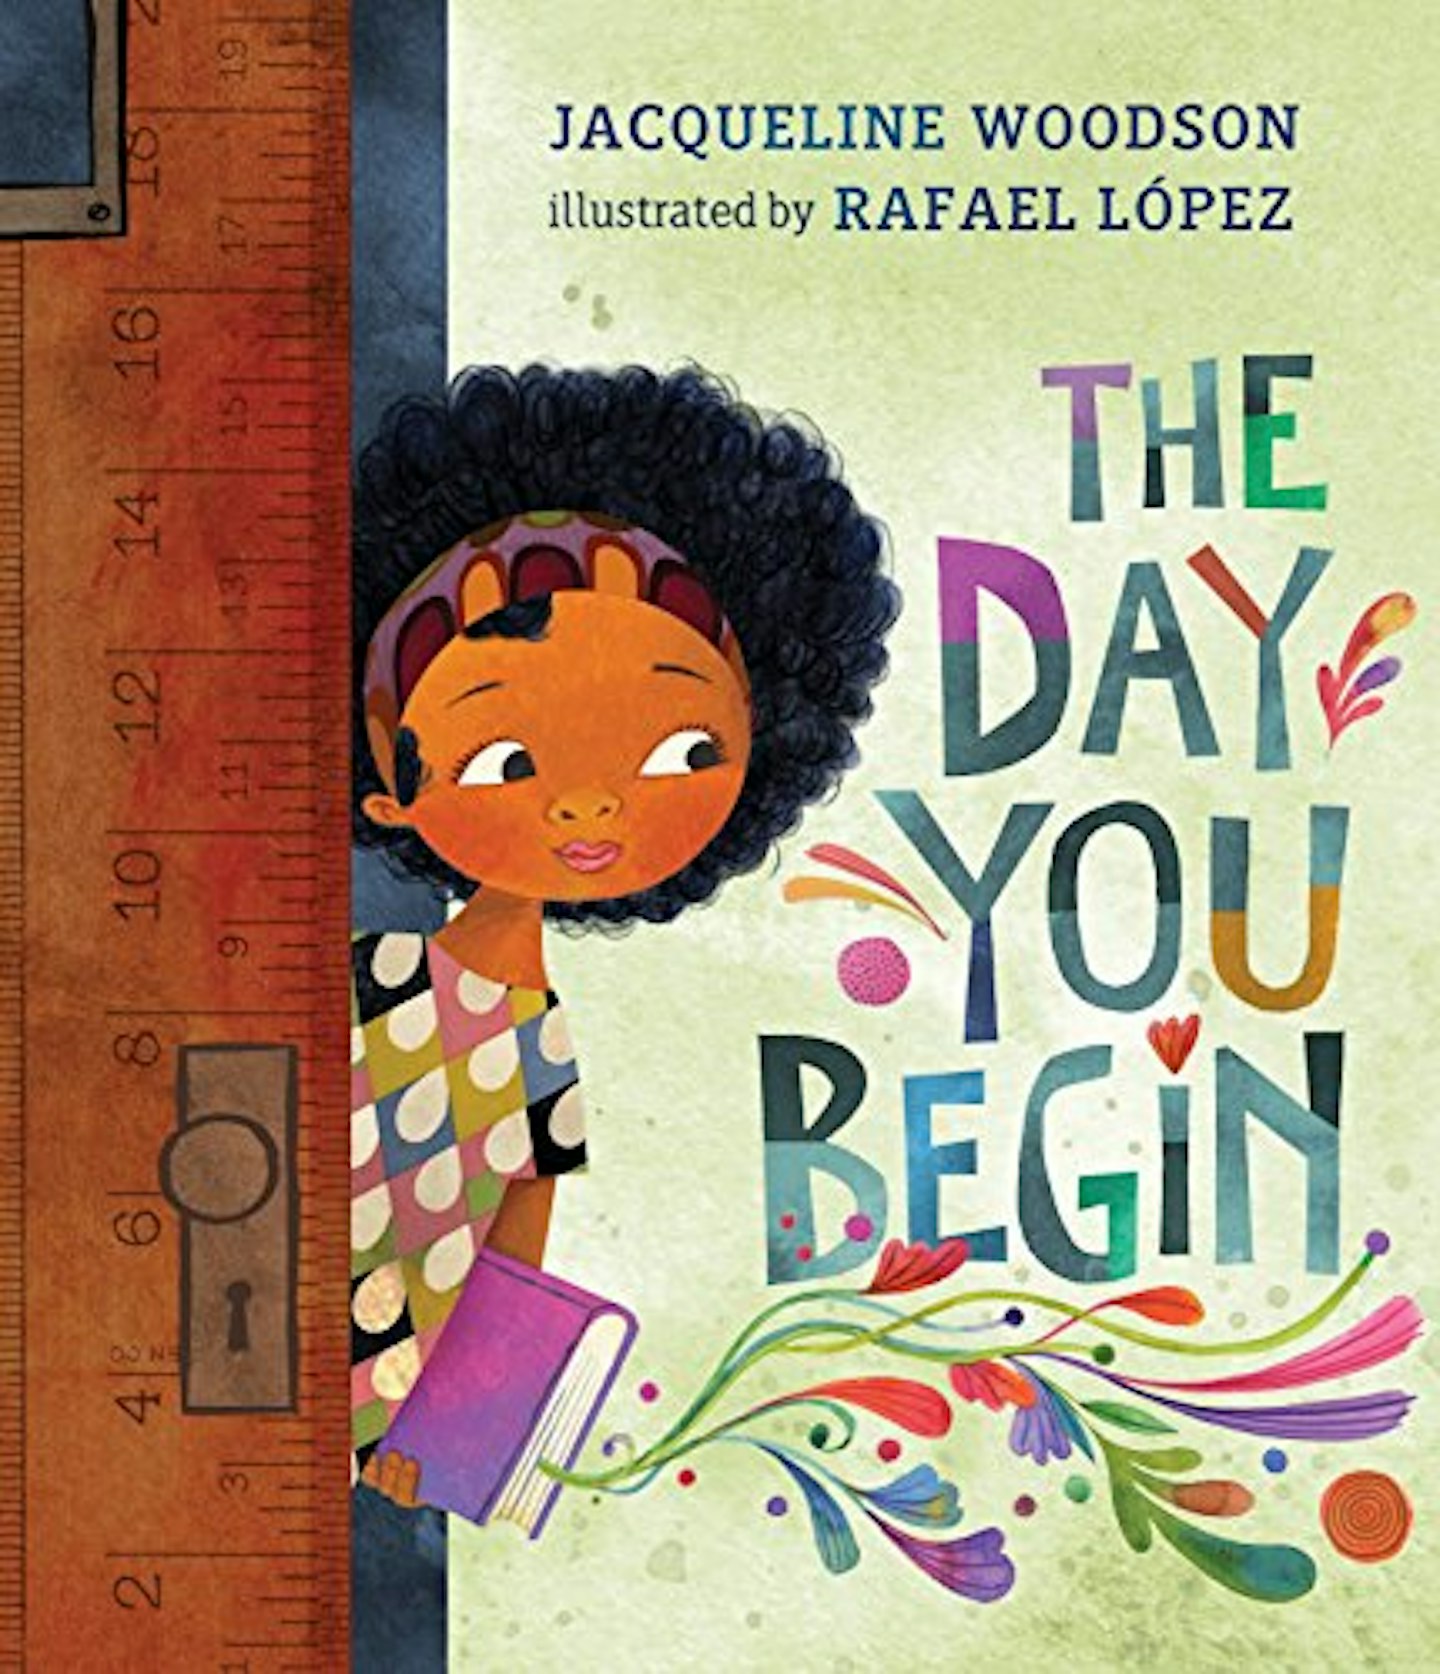 Day You Begin by Jacqueline Woodson